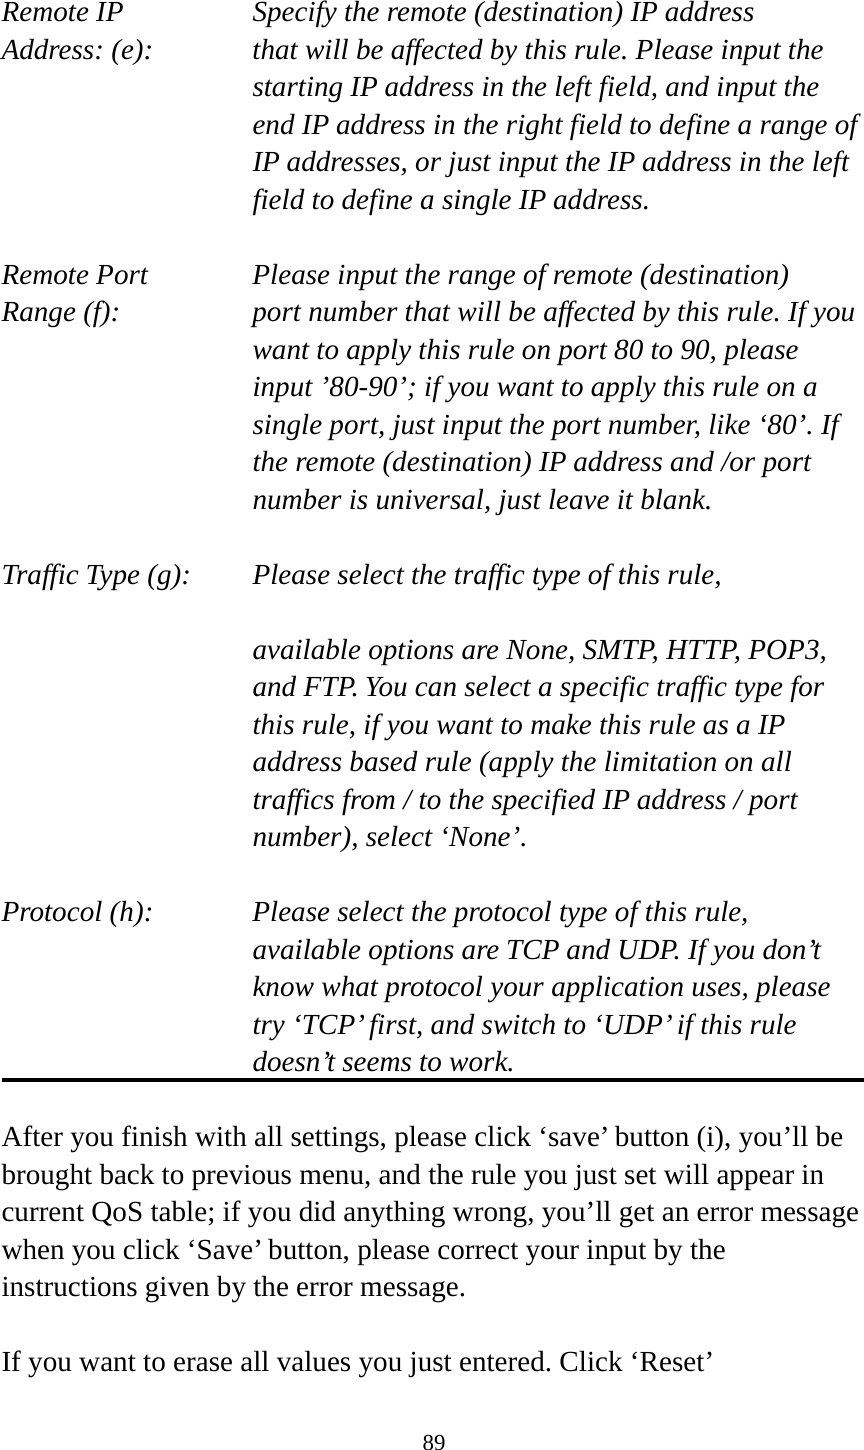 89  Remote IP        Specify the remote (destination) IP address Address: (e):    that will be affected by this rule. Please input the starting IP address in the left field, and input the end IP address in the right field to define a range of IP addresses, or just input the IP address in the left field to define a single IP address.  Remote Port      Please input the range of remote (destination) Range (f):  port number that will be affected by this rule. If you want to apply this rule on port 80 to 90, please input ’80-90’; if you want to apply this rule on a single port, just input the port number, like ‘80’. If the remote (destination) IP address and /or port number is universal, just leave it blank.  Traffic Type (g):    Please select the traffic type of this rule,  available options are None, SMTP, HTTP, POP3, and FTP. You can select a specific traffic type for this rule, if you want to make this rule as a IP address based rule (apply the limitation on all traffics from / to the specified IP address / port number), select ‘None’.  Protocol (h):      Please select the protocol type of this rule,   available options are TCP and UDP. If you don’t know what protocol your application uses, please try ‘TCP’ first, and switch to ‘UDP’ if this rule doesn’t seems to work.  After you finish with all settings, please click ‘save’ button (i), you’ll be brought back to previous menu, and the rule you just set will appear in current QoS table; if you did anything wrong, you’ll get an error message when you click ‘Save’ button, please correct your input by the instructions given by the error message.  If you want to erase all values you just entered. Click ‘Reset’ 